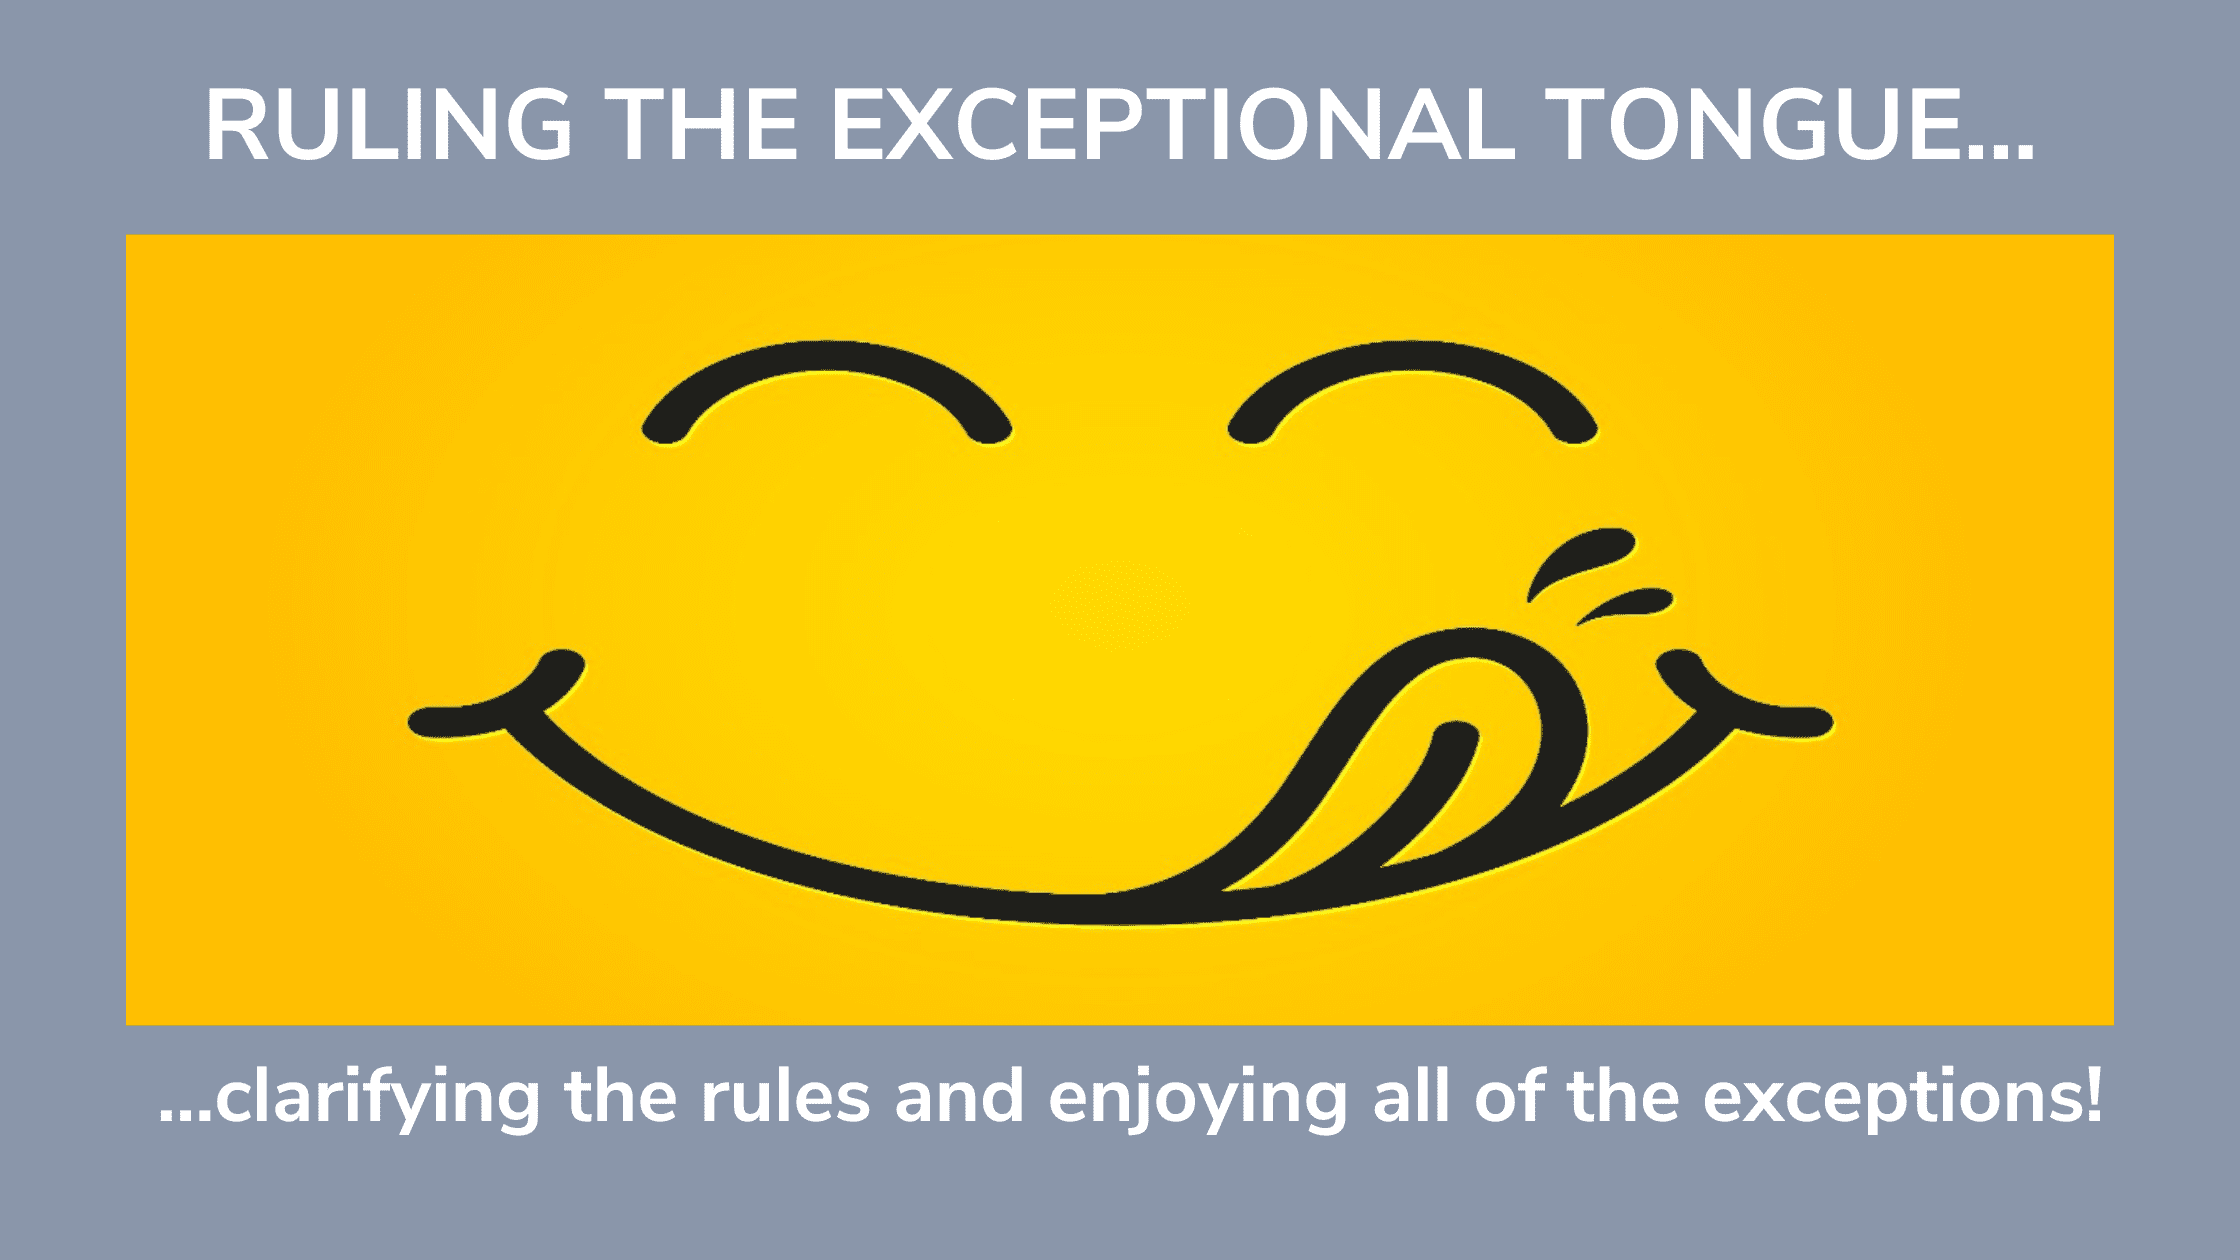 A smiling face illustration with the tong happily licking the upper lip. This represents the blog titled "Ruling the Exceptional Tongue: Clarifying rules enjoying exceptions"